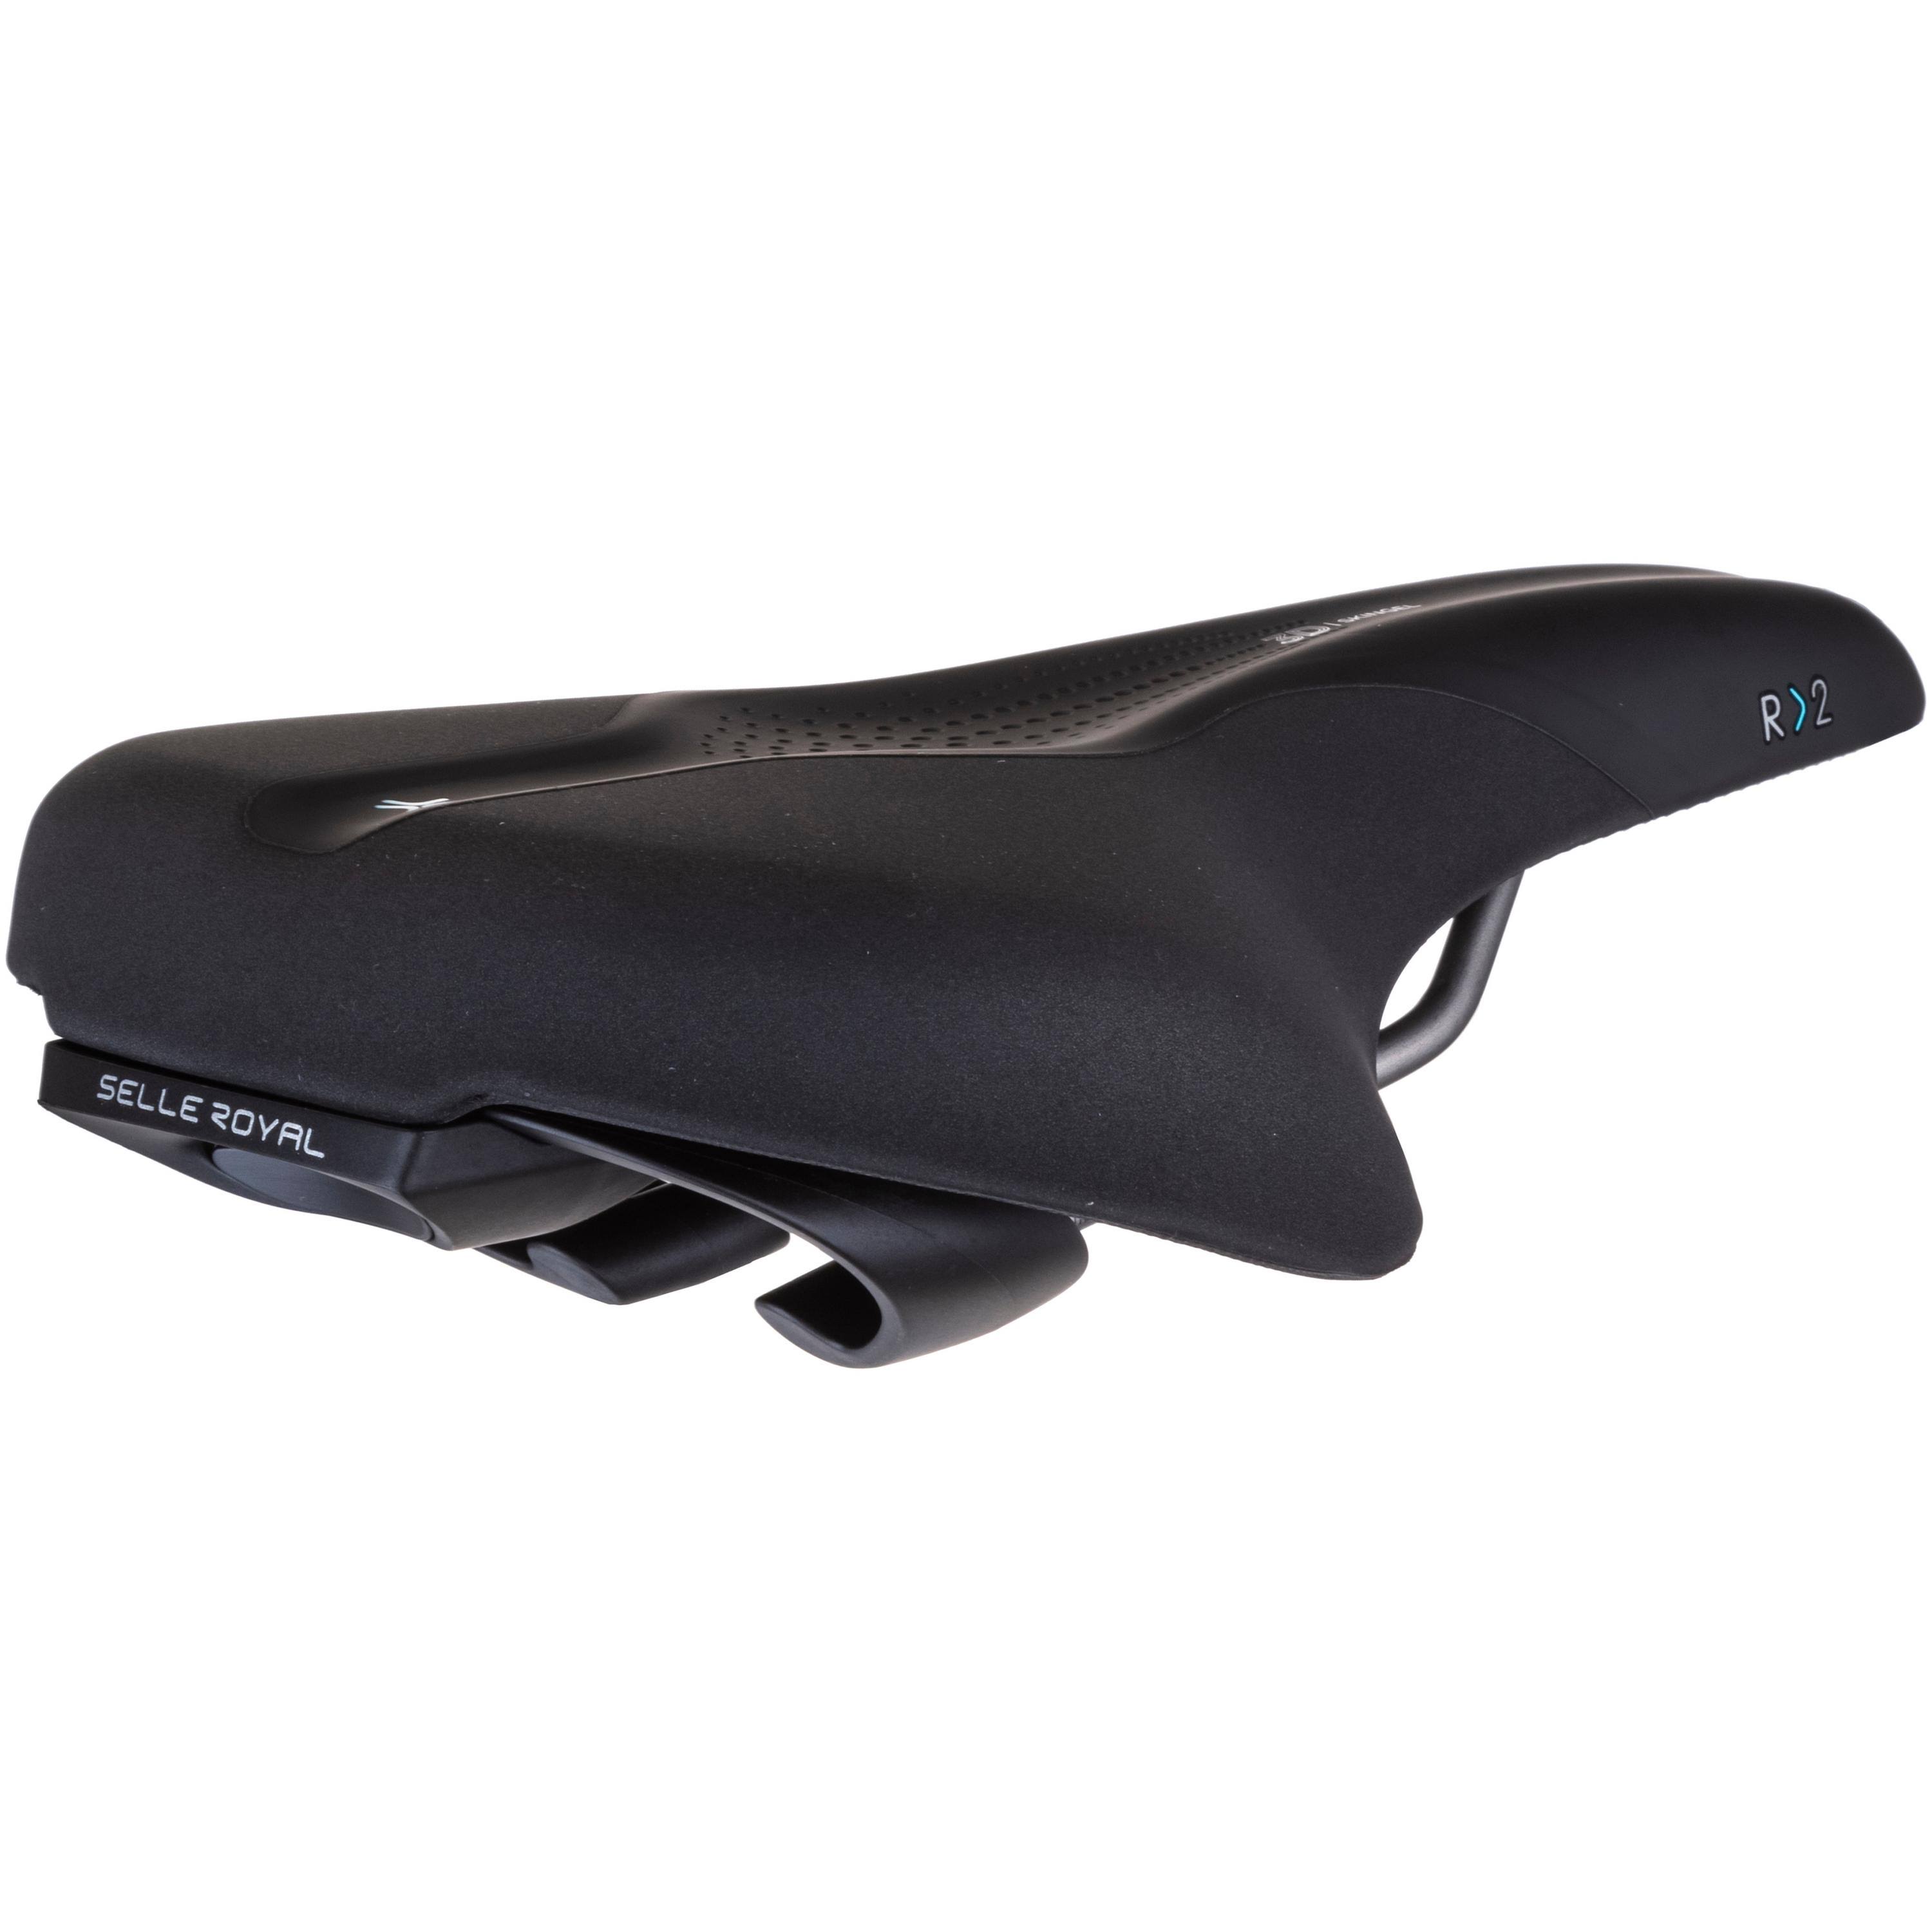 Selle Royal R3 Scientia Relaxed Bike Saddle - Black, Large